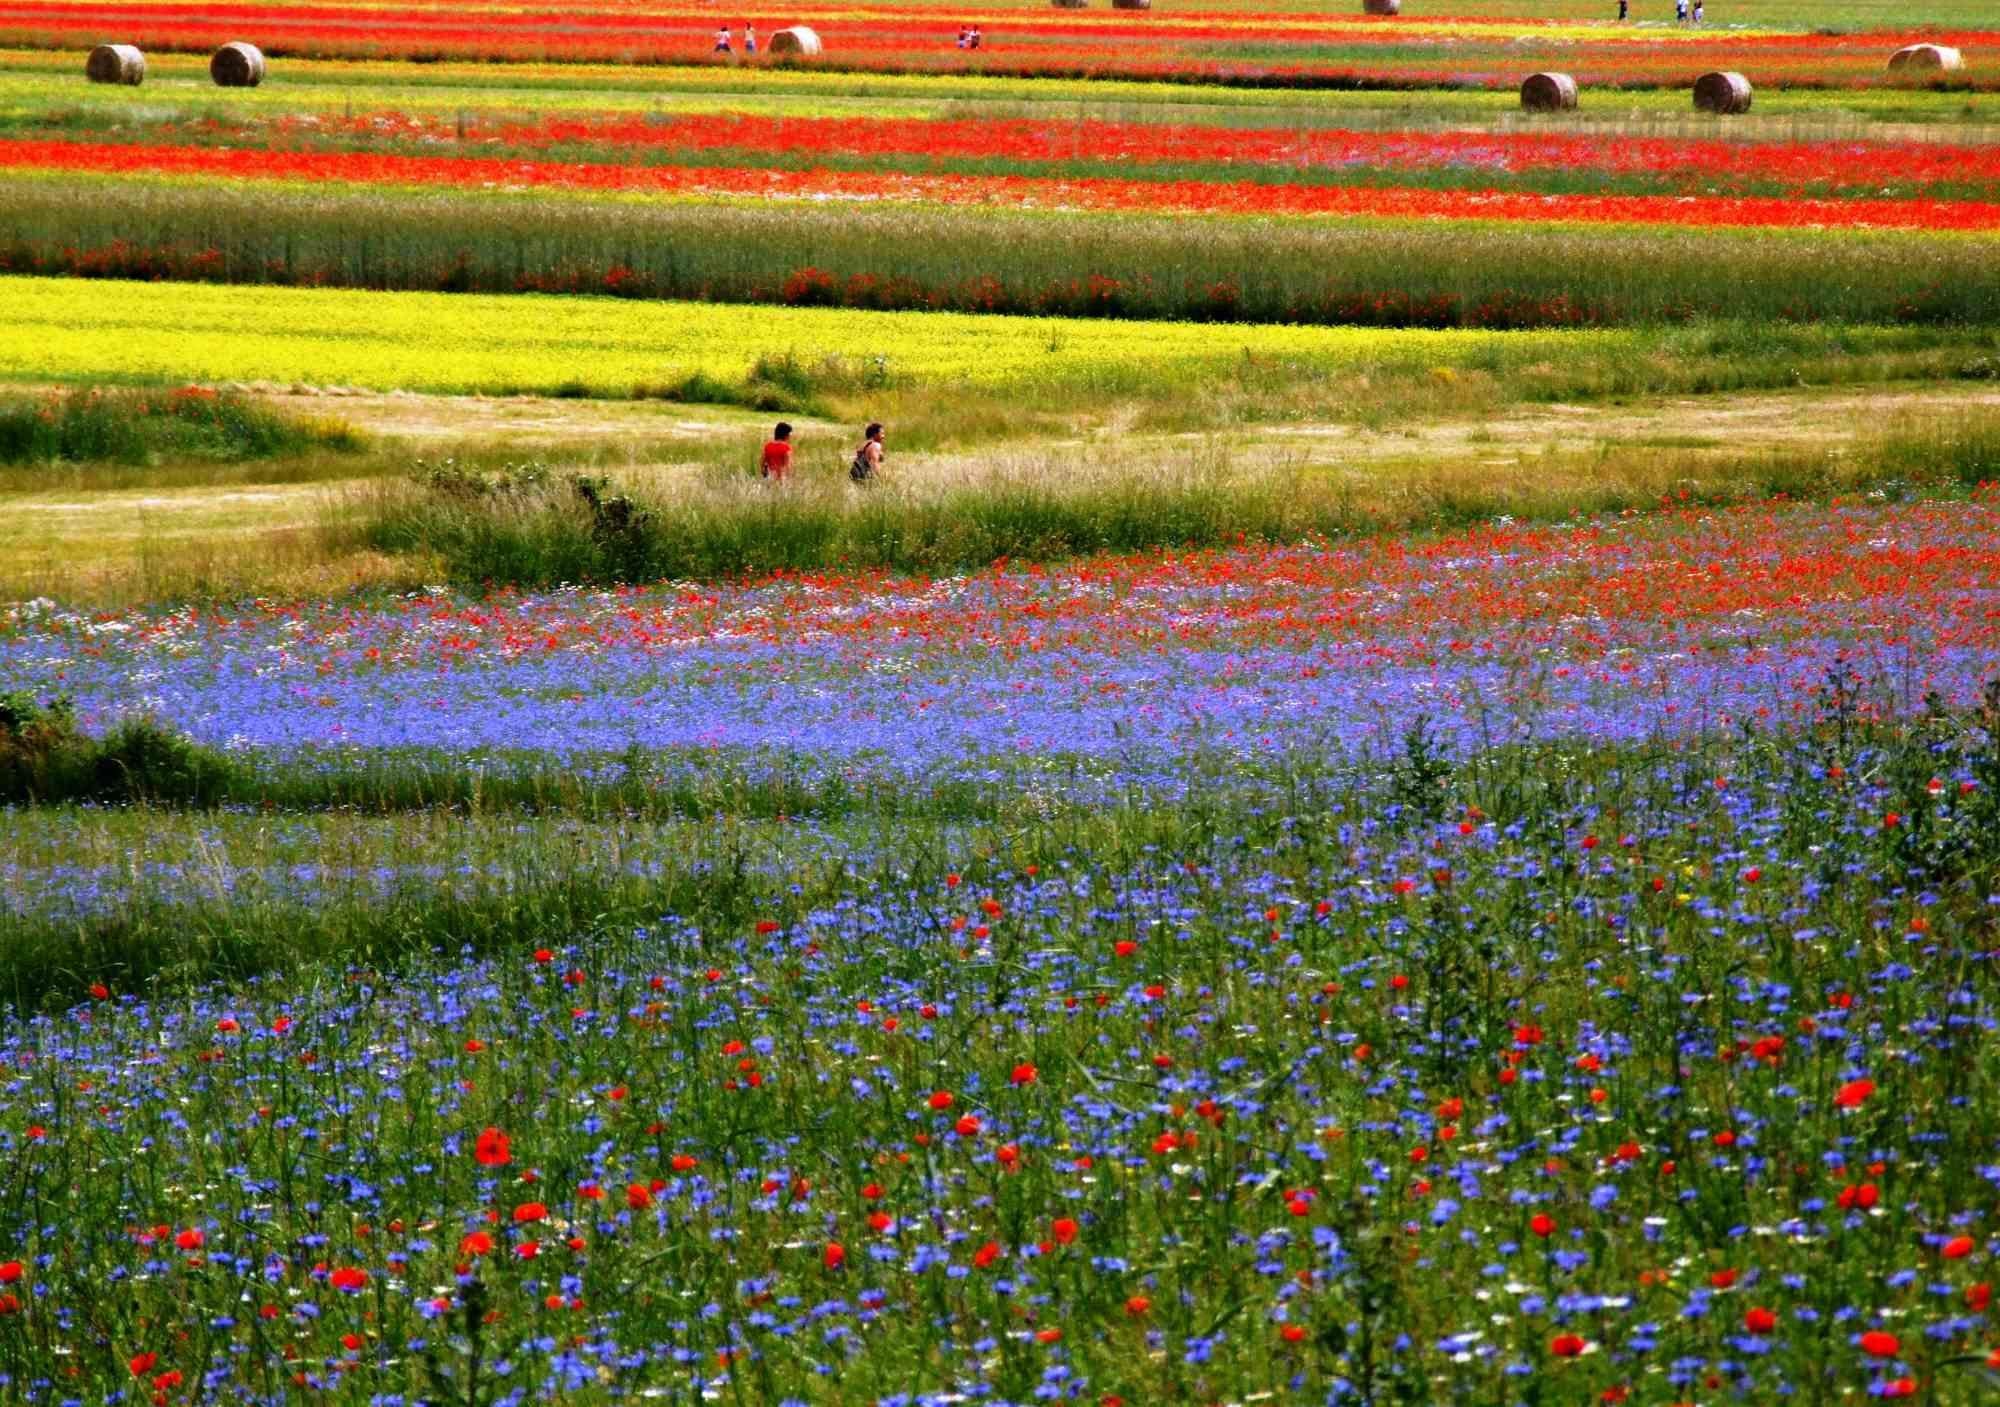 Eden is one of the best photo on canvas realized by Giuseppe Marani in 2010.

Always passionate about landscapes and photography, the artist then devoted himself to landscaping. He greatly admires the beauty of the landscapes of Castelluccio di